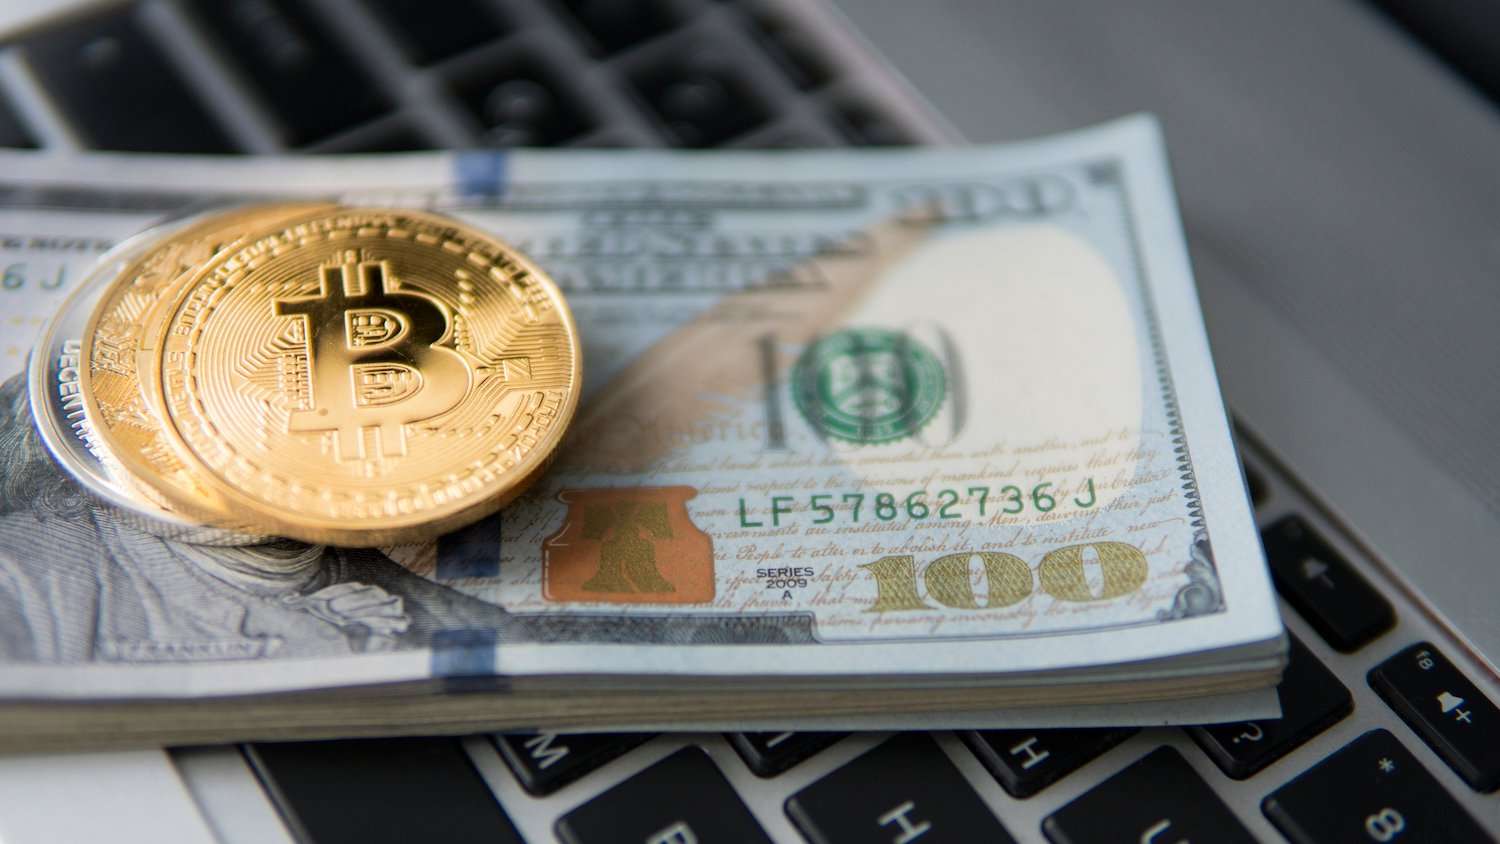 Why Bitcoin should be invested with caution now. | INFbusiness